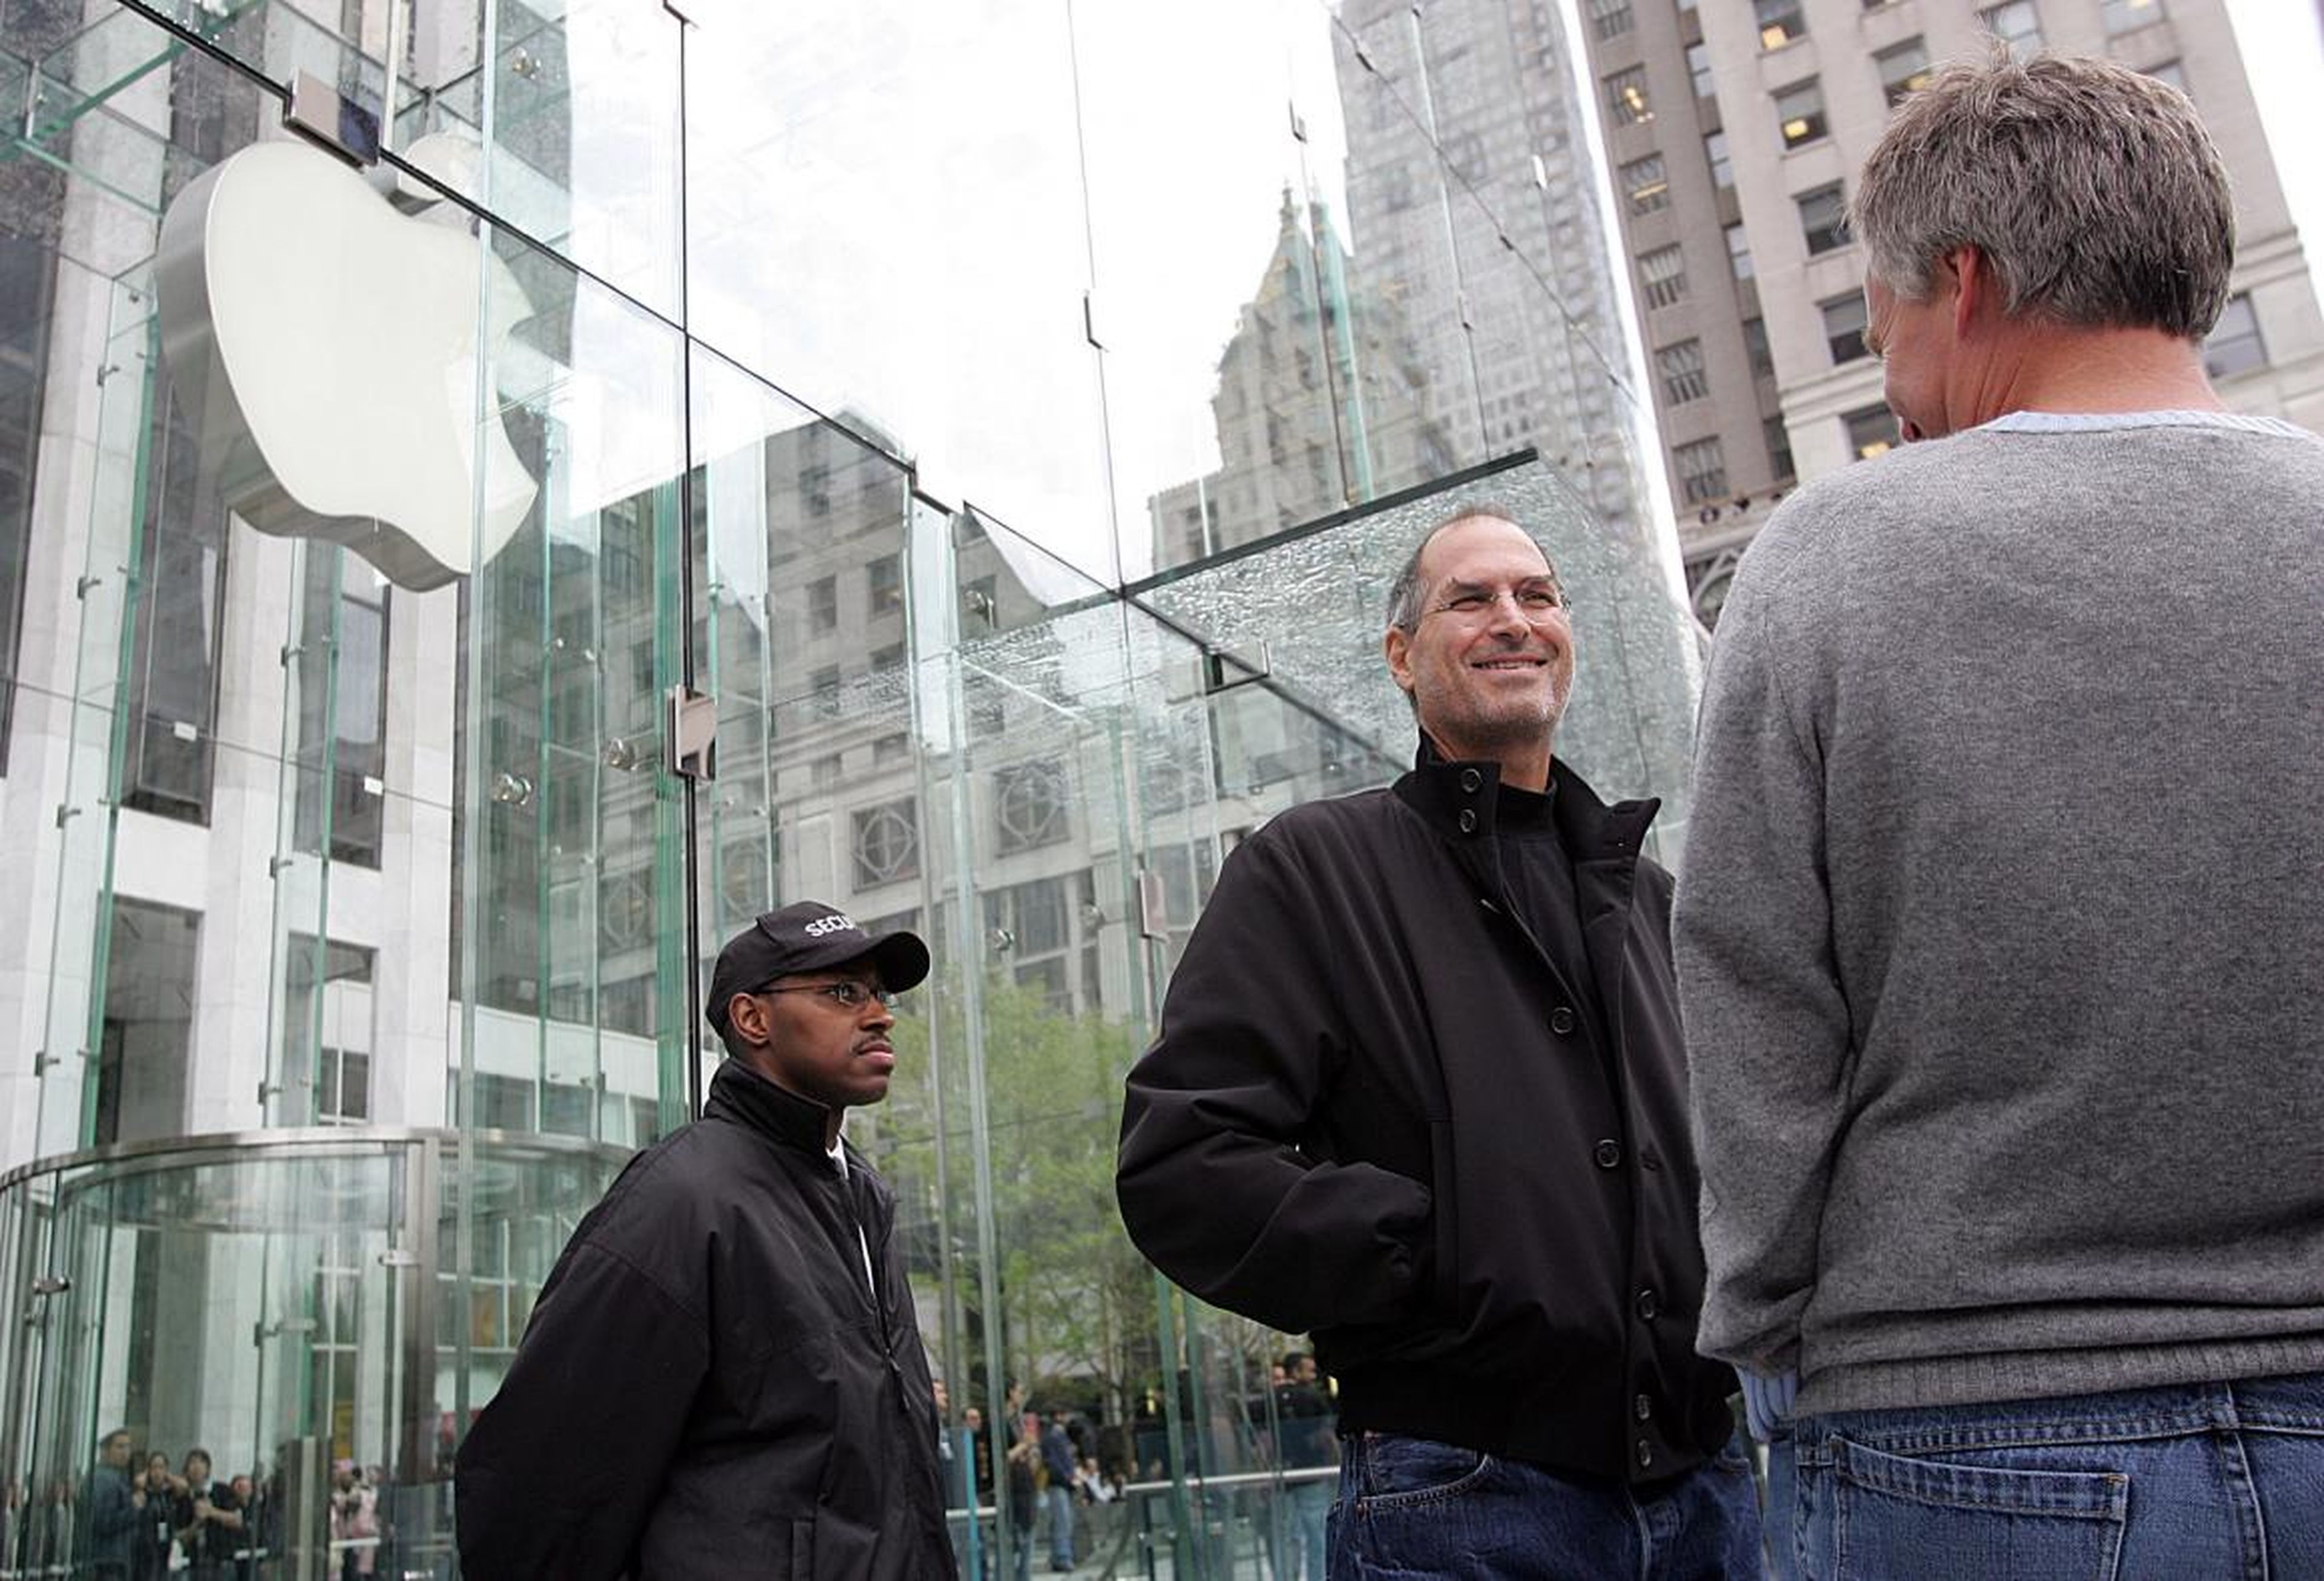 Apple was on the upswing. In 2006, the flagship Apple Store opened in Midtown Manhattan. Its unique glass-cube structure makes it a modern New York City landmark.